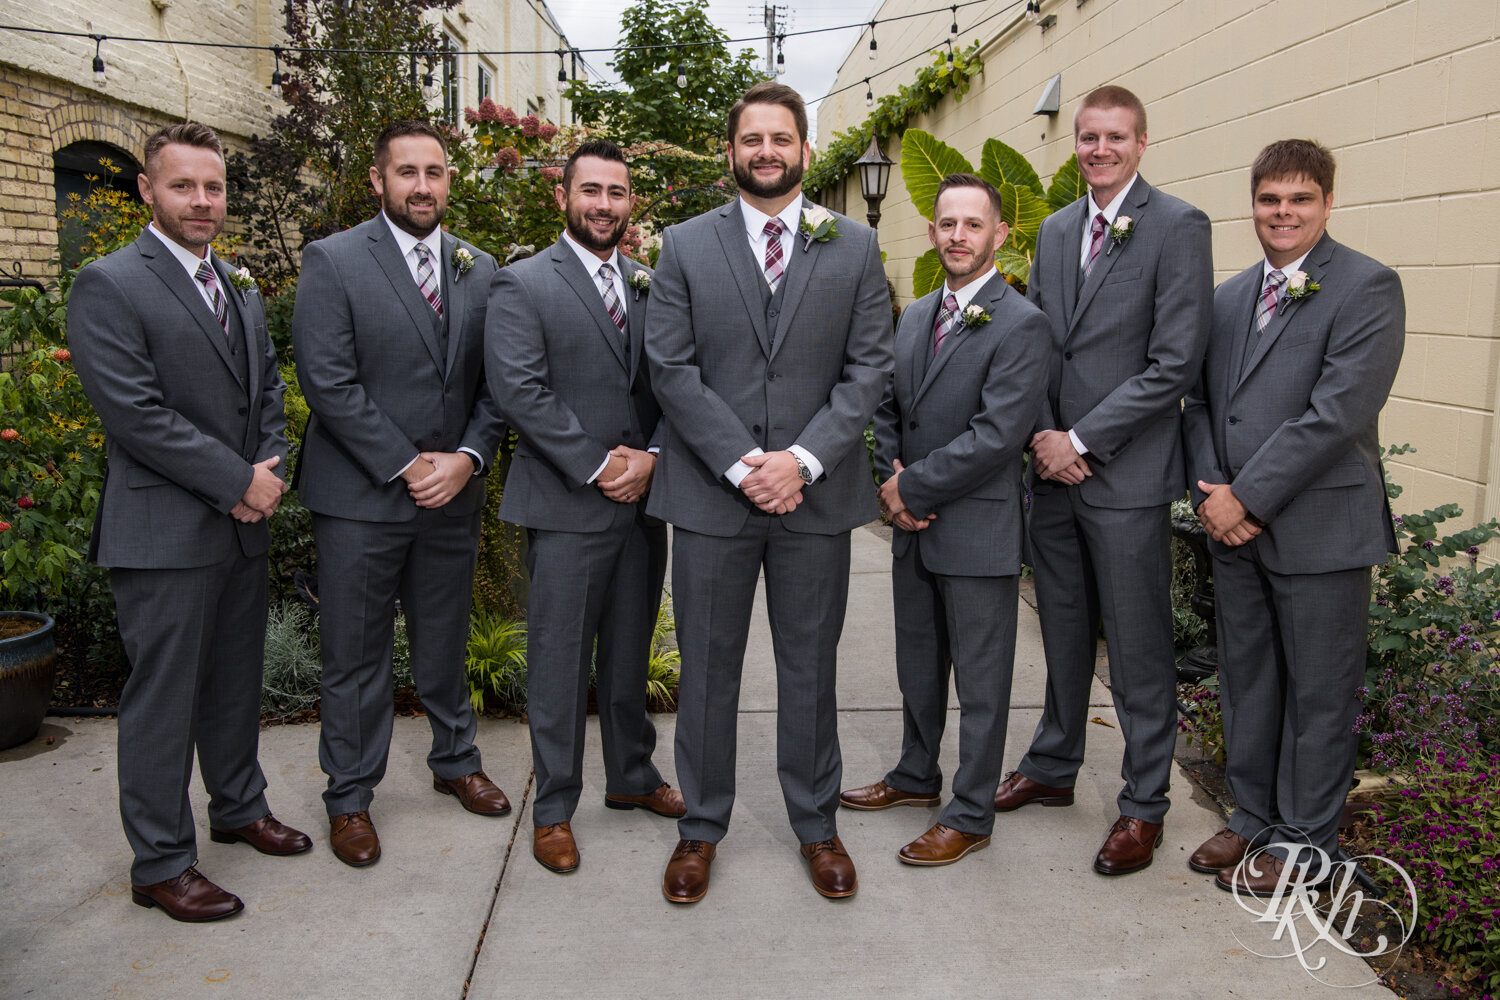 Wedding party in gray suits smile at Kellerman's Event Center in White Bear Lake, Minnesota.